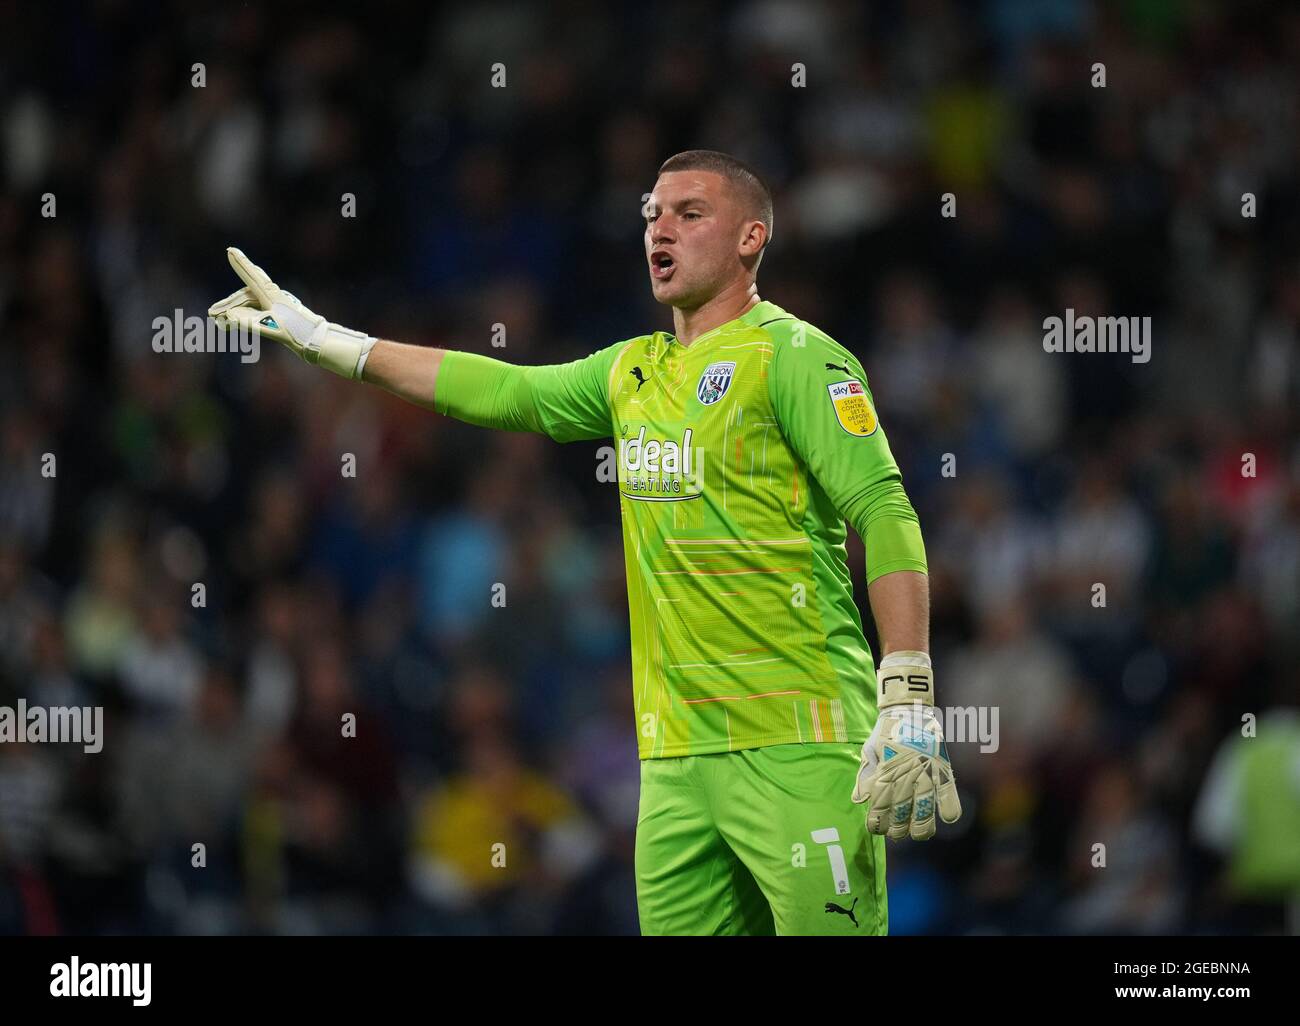 West Bromwich, UK. 18th Aug, 2021. Goalkeeper Sam Johnstone of WBA during the Sky Bet Championship match between West Bromwich Albion and Sheffield United at The Hawthorns, West Bromwich, England on 18 August 2021. Photo by Andy Rowland. Credit: PRiME Media Images/Alamy Live News Stock Photo